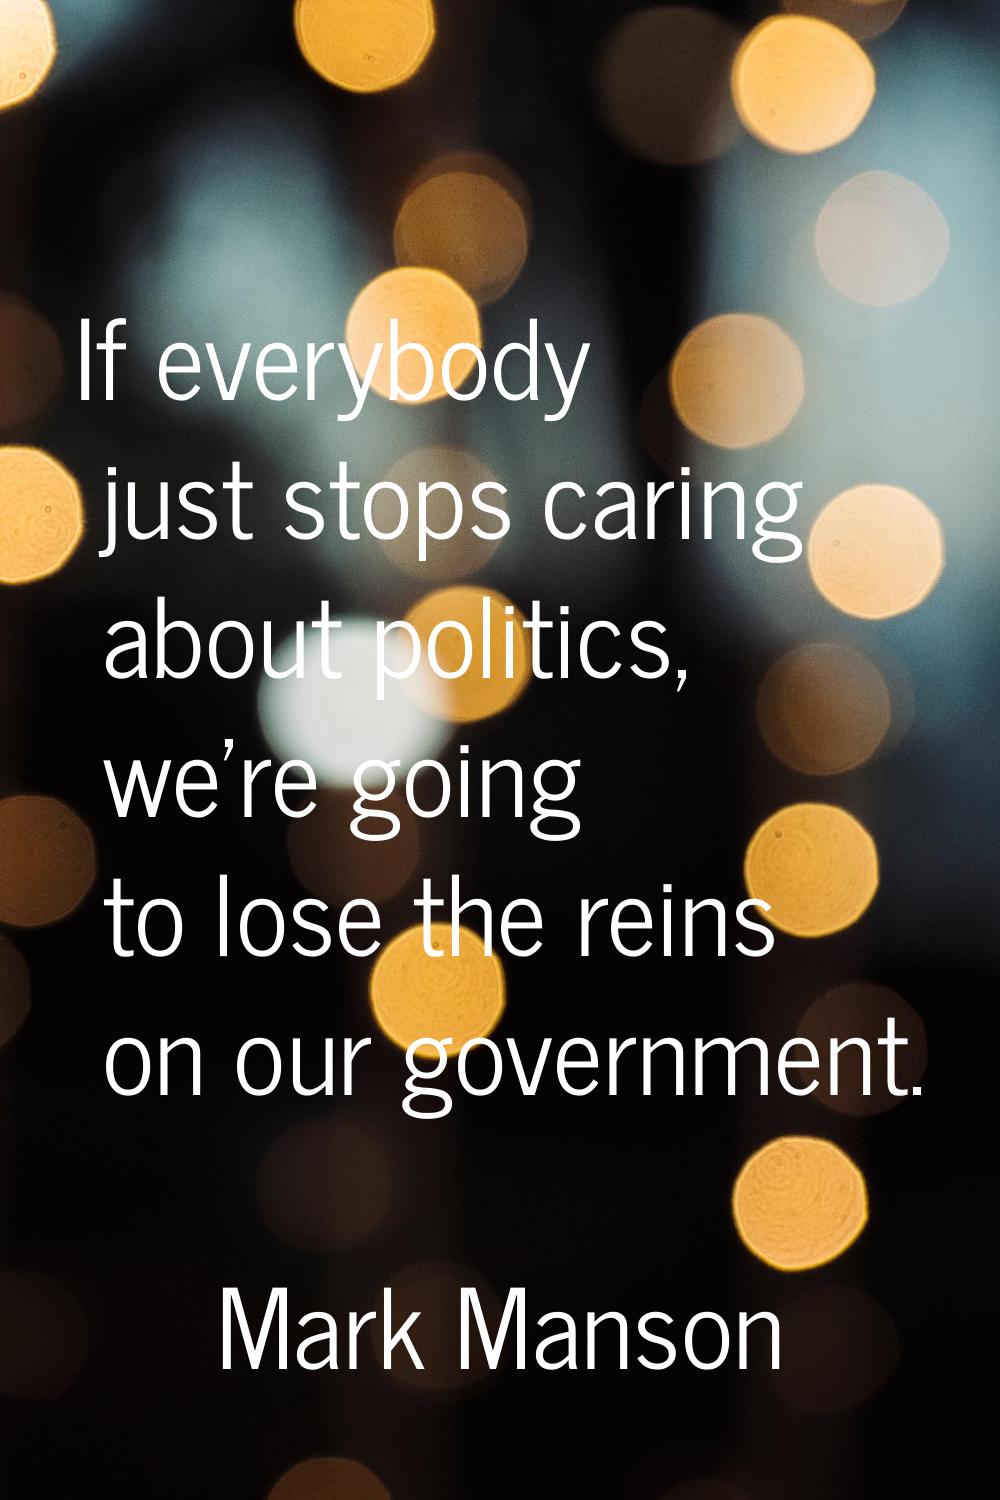 If everybody just stops caring about politics, we're going to lose the reins on our government.